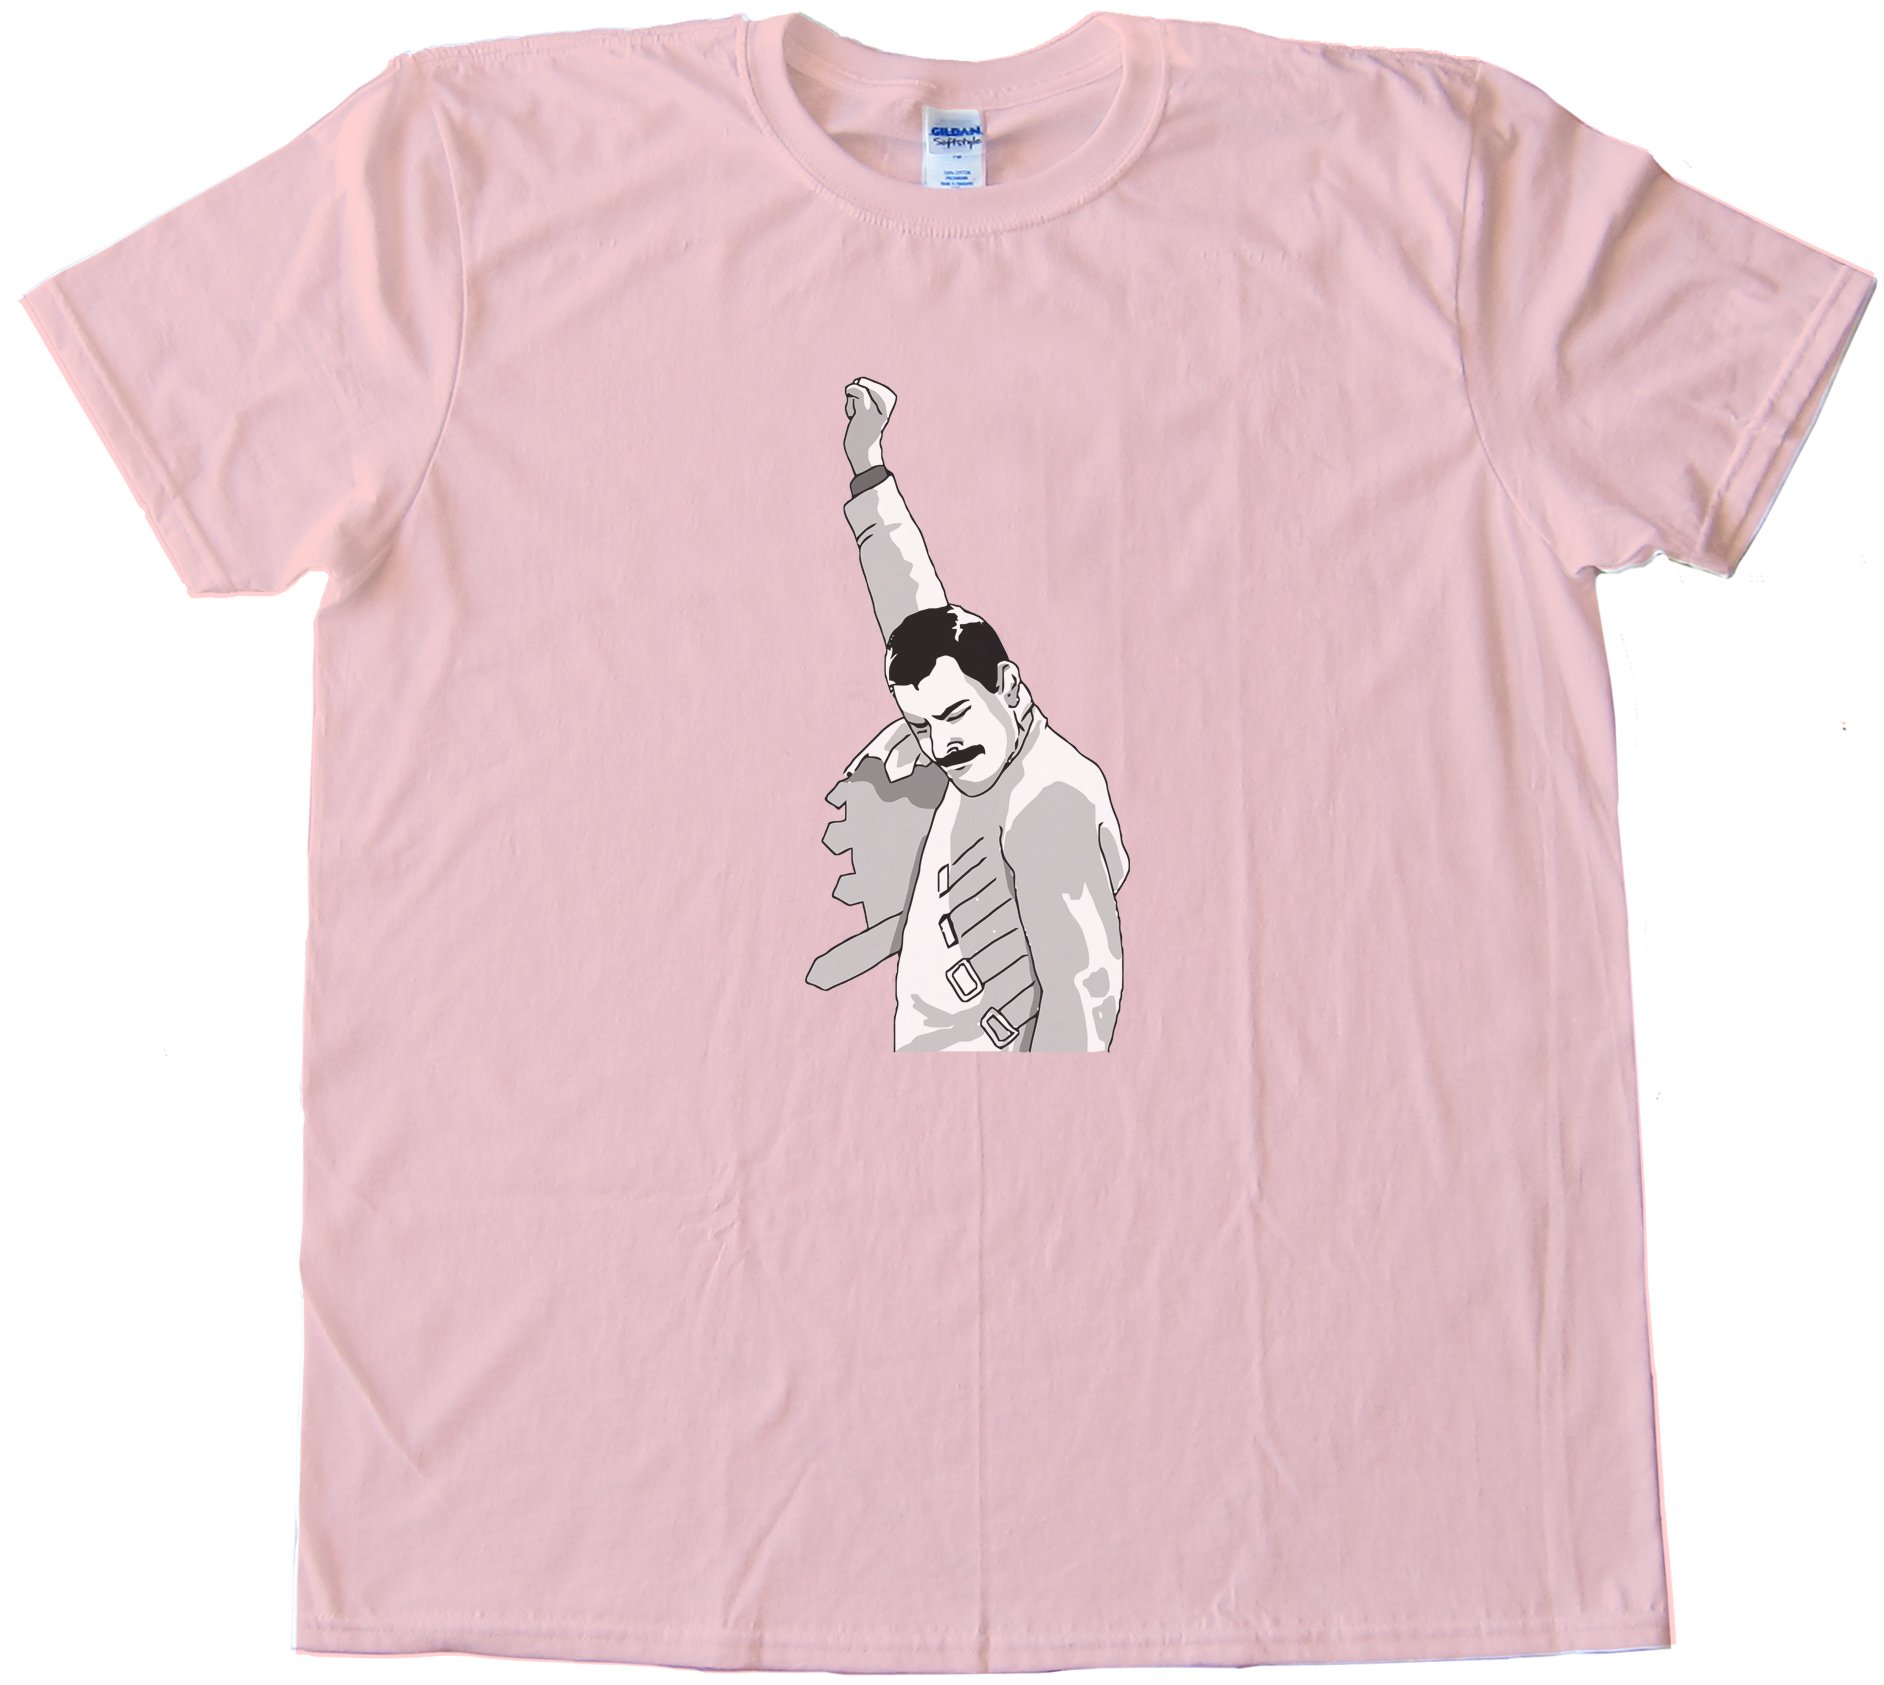 Freddy Mercury - Lead Singer Of The Rock & Roll Band Queen Tee Shirt